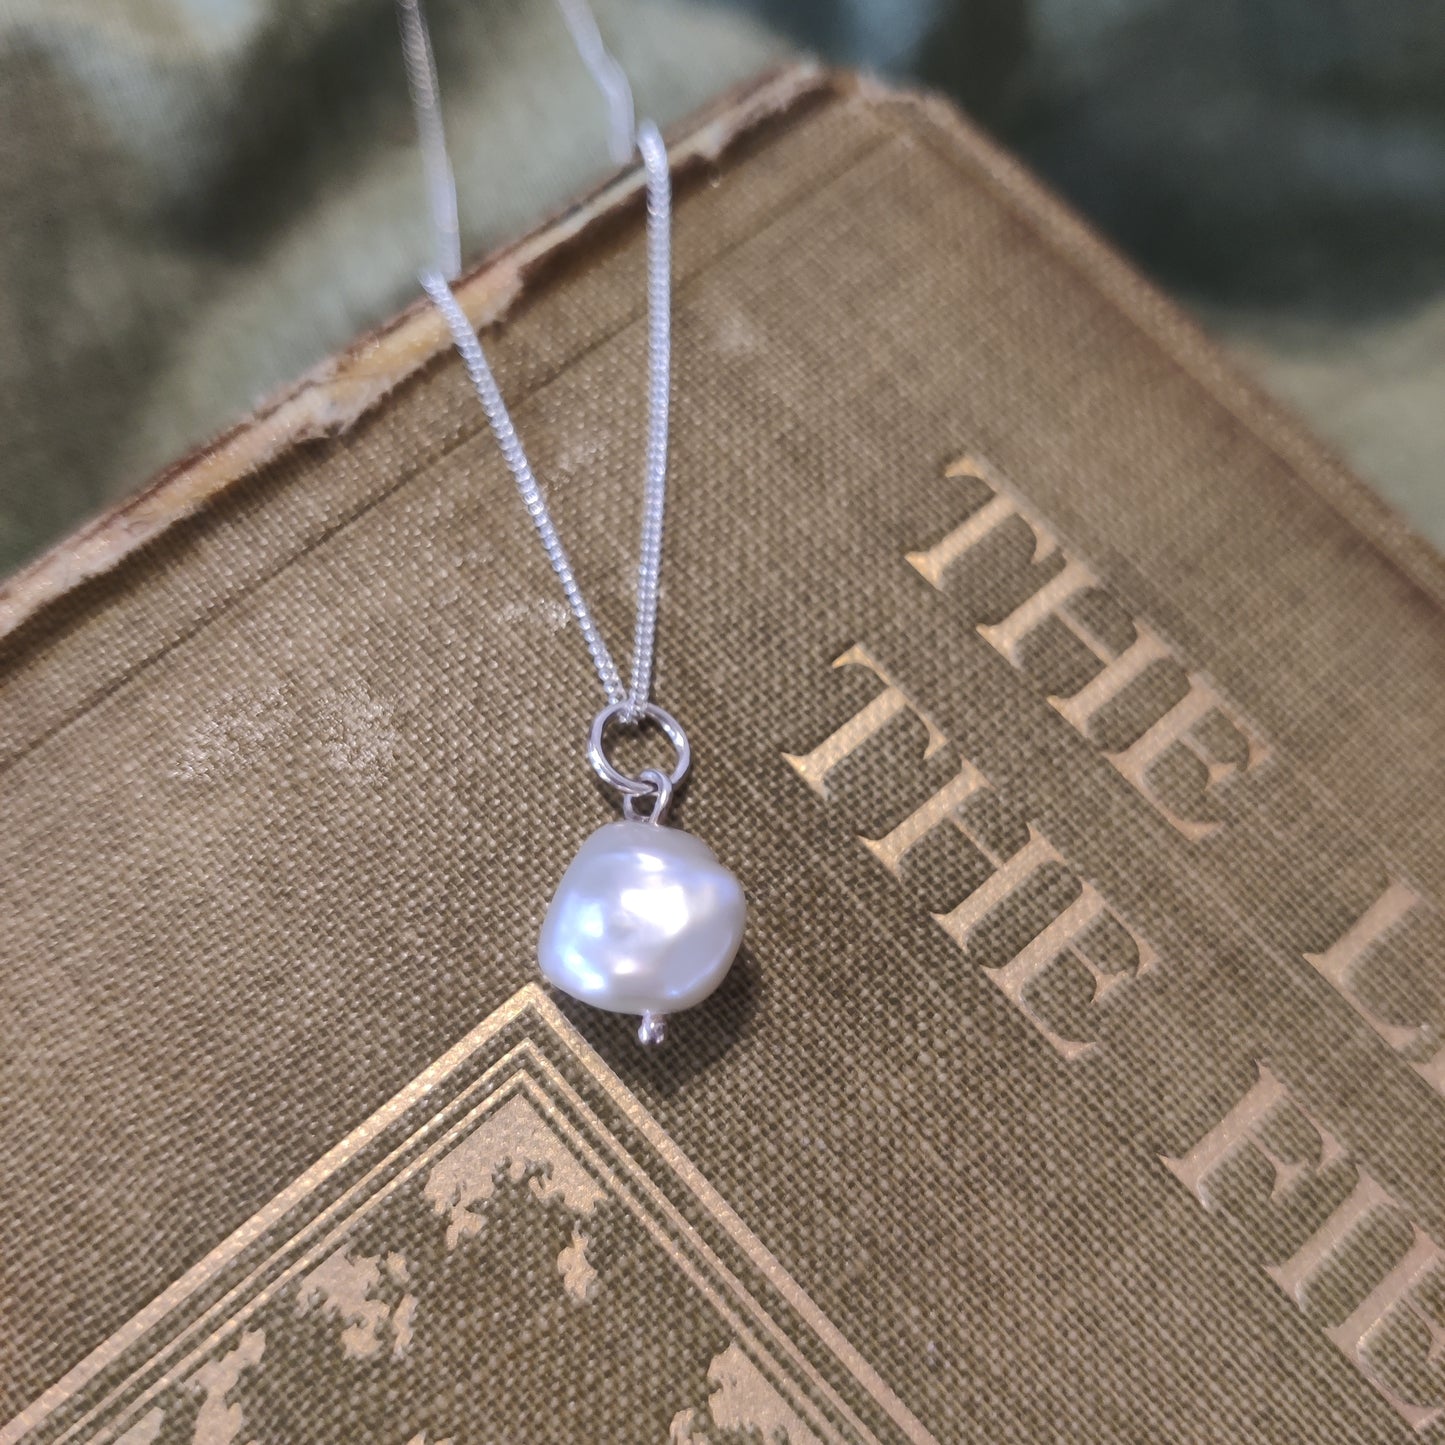 Delicate pearl pendant necklace by Notion Jewellery